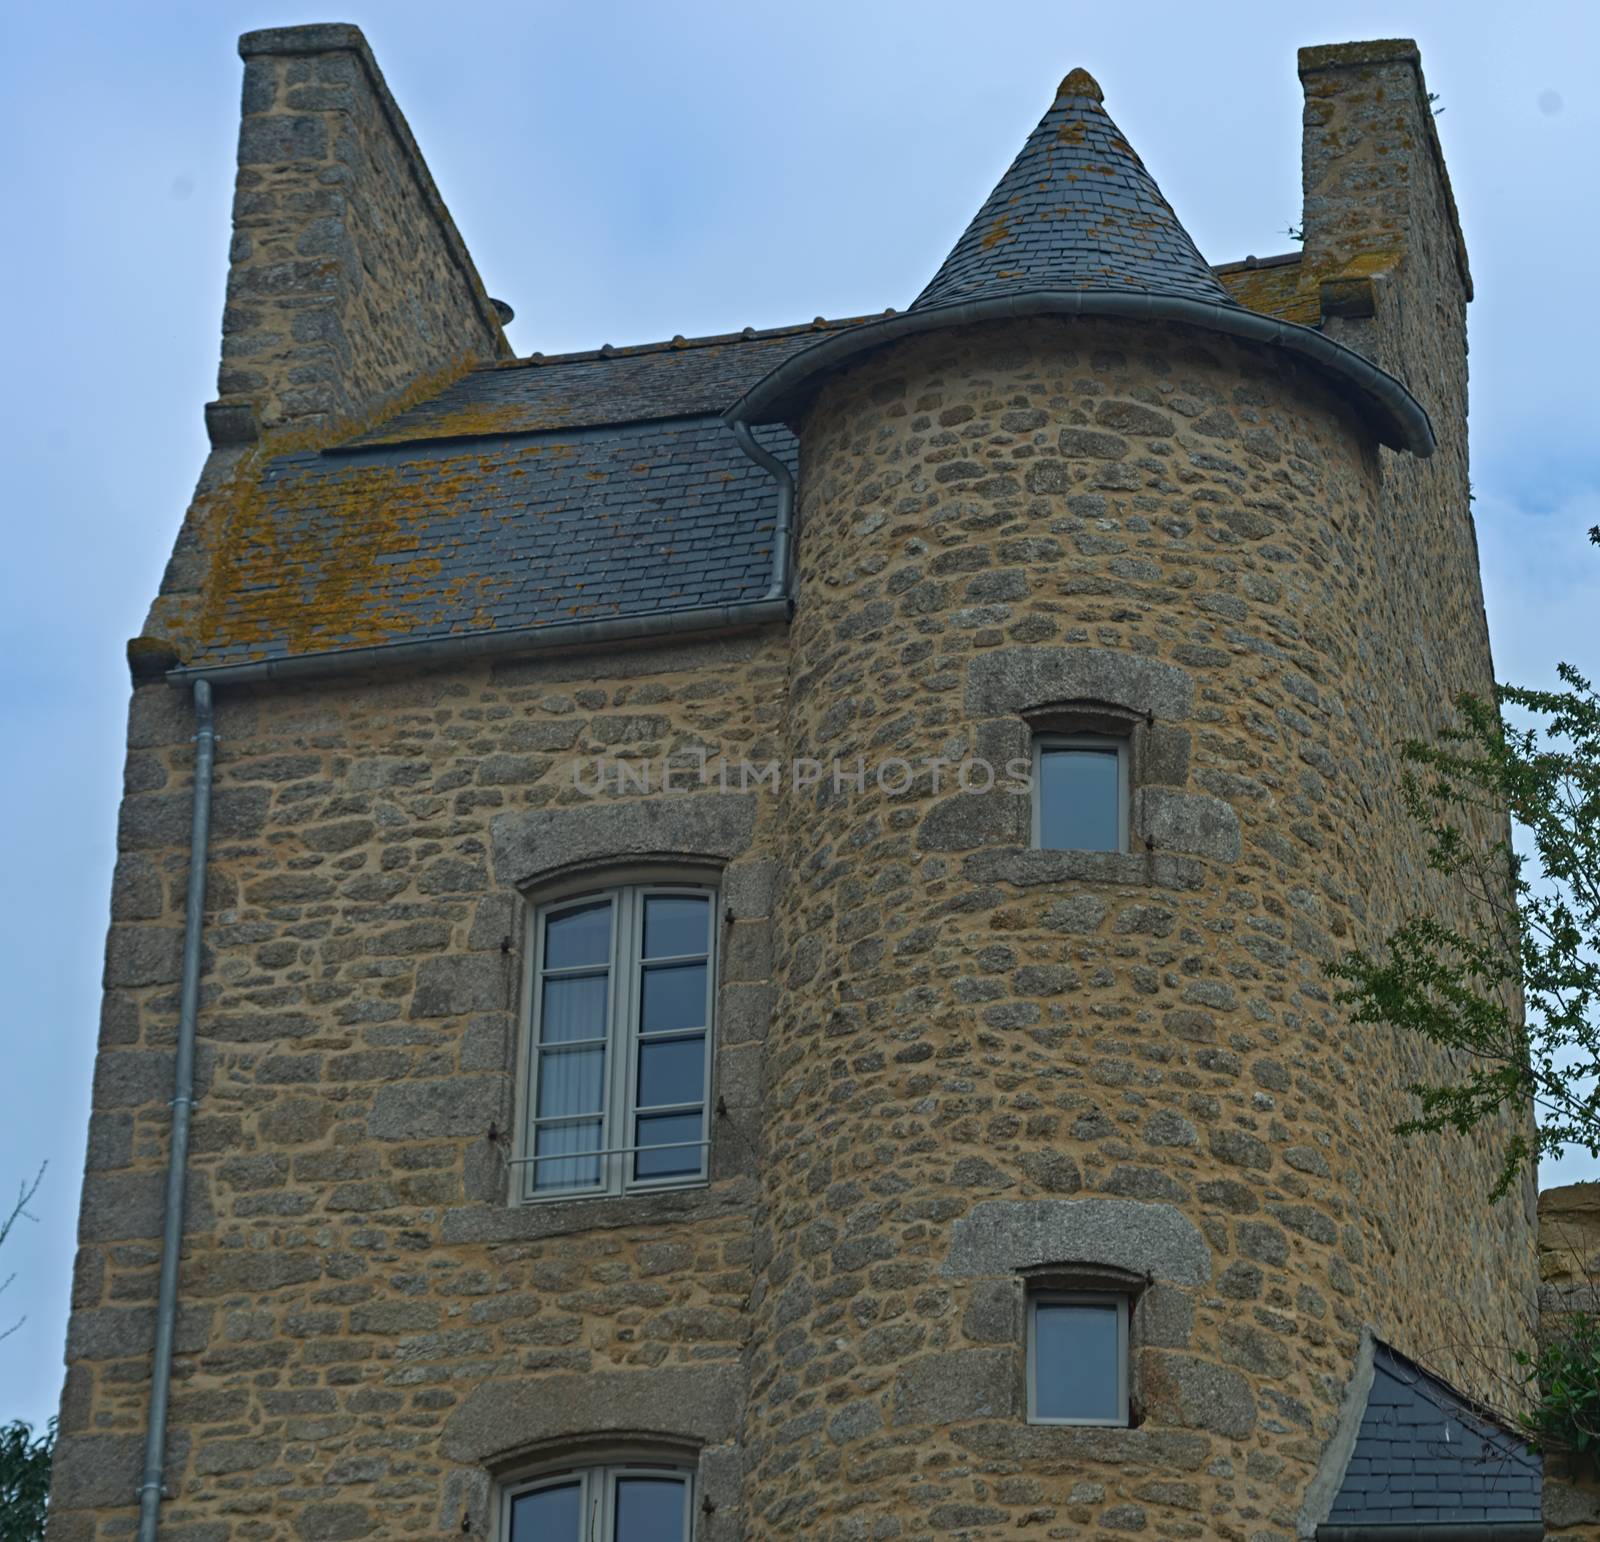 Old traditional urban stone house in Dinan, France by sheriffkule